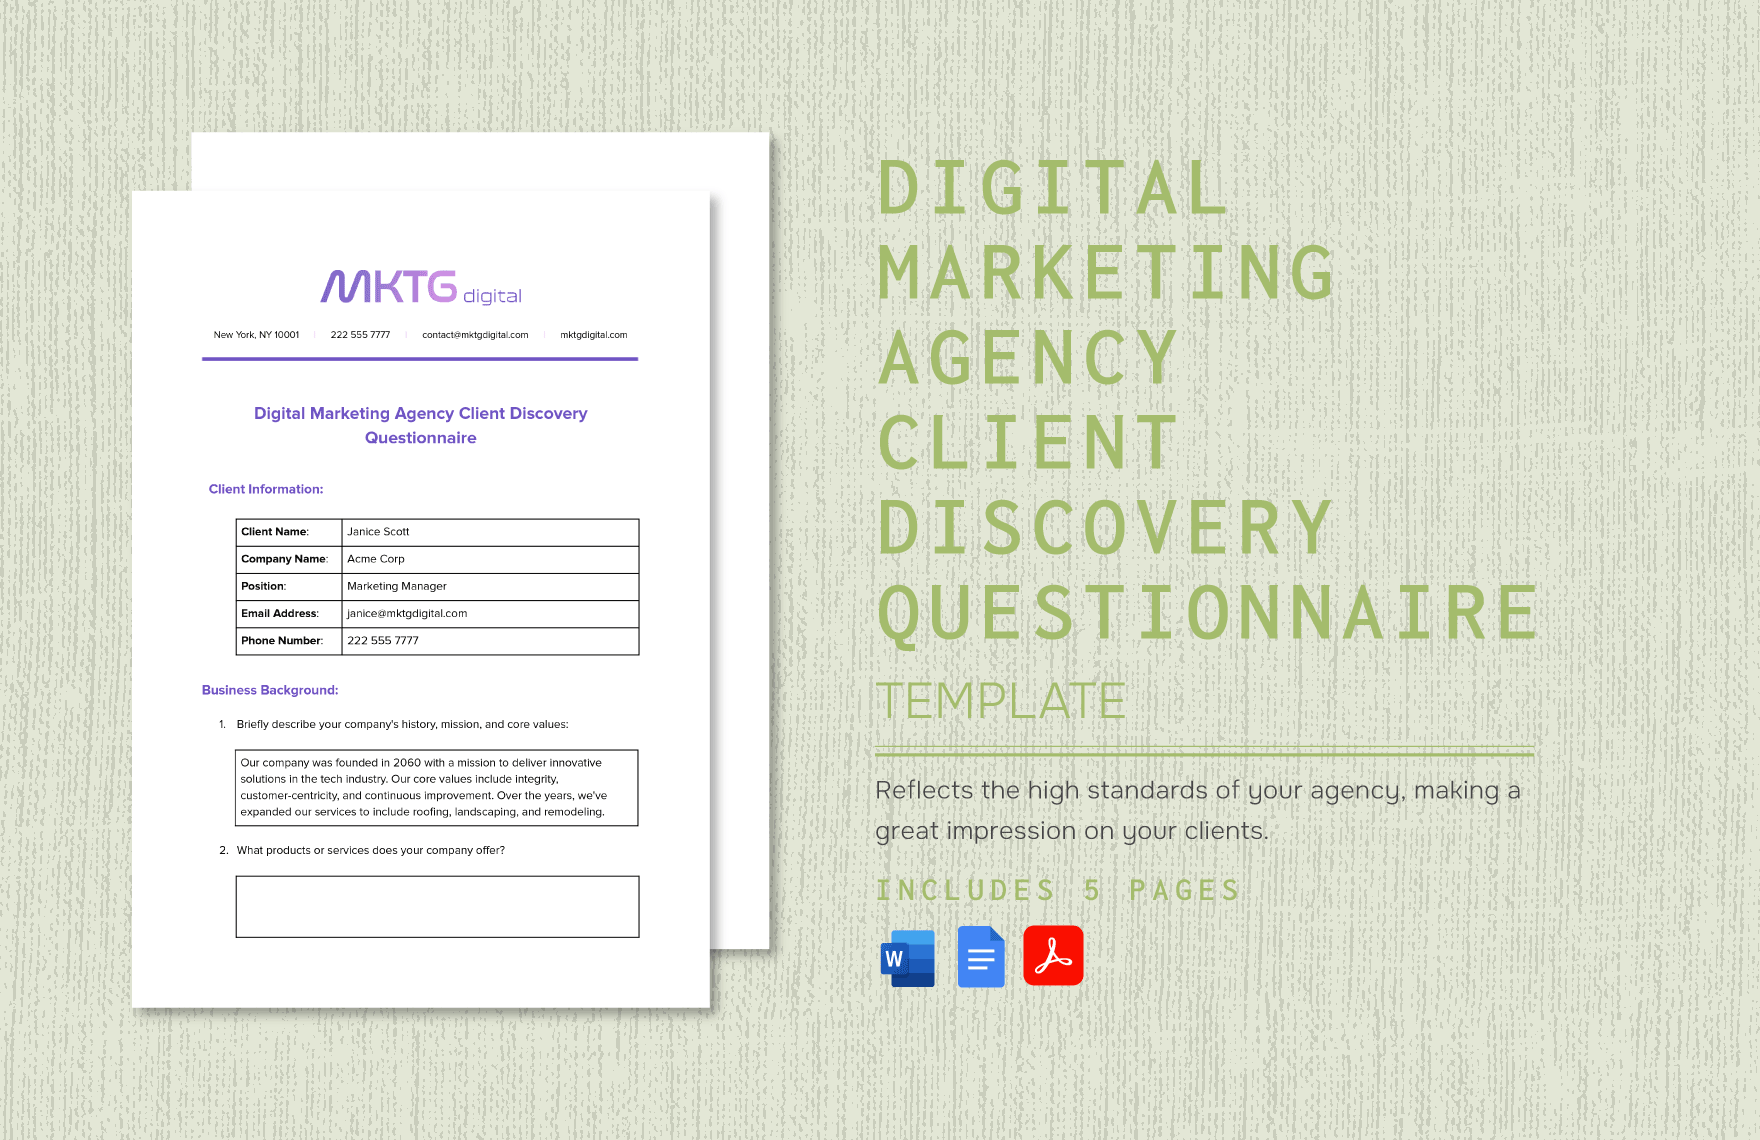 Digital Marketing Agency Client Discovery Questionnaire Template in Word, Google Docs, PDF